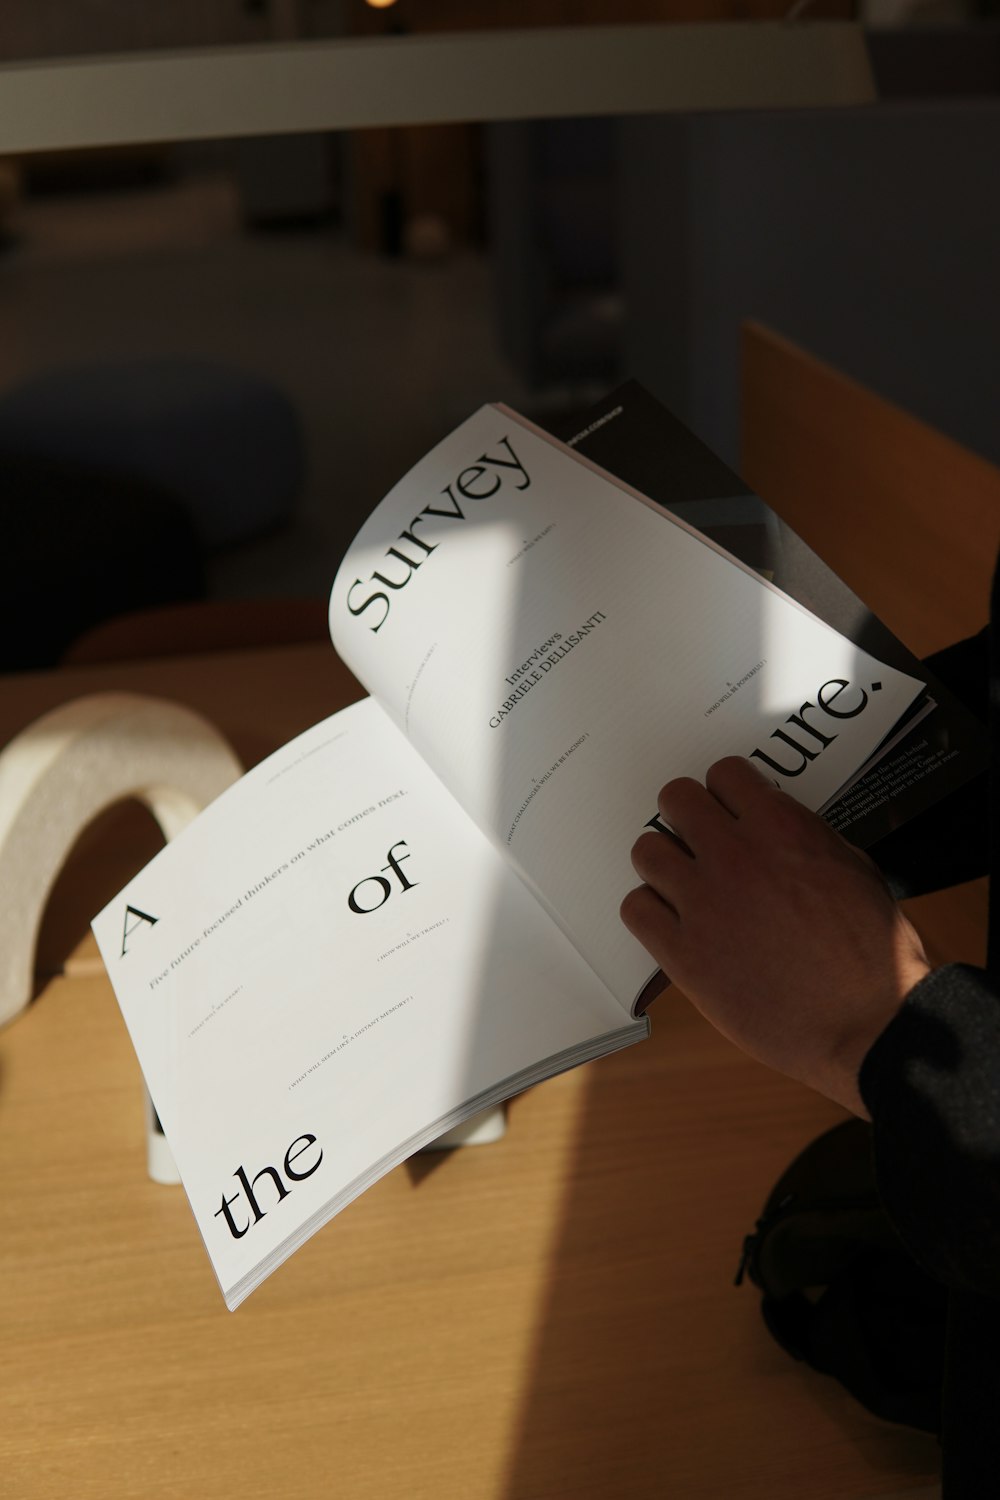 a person reading a book with the word survey on it